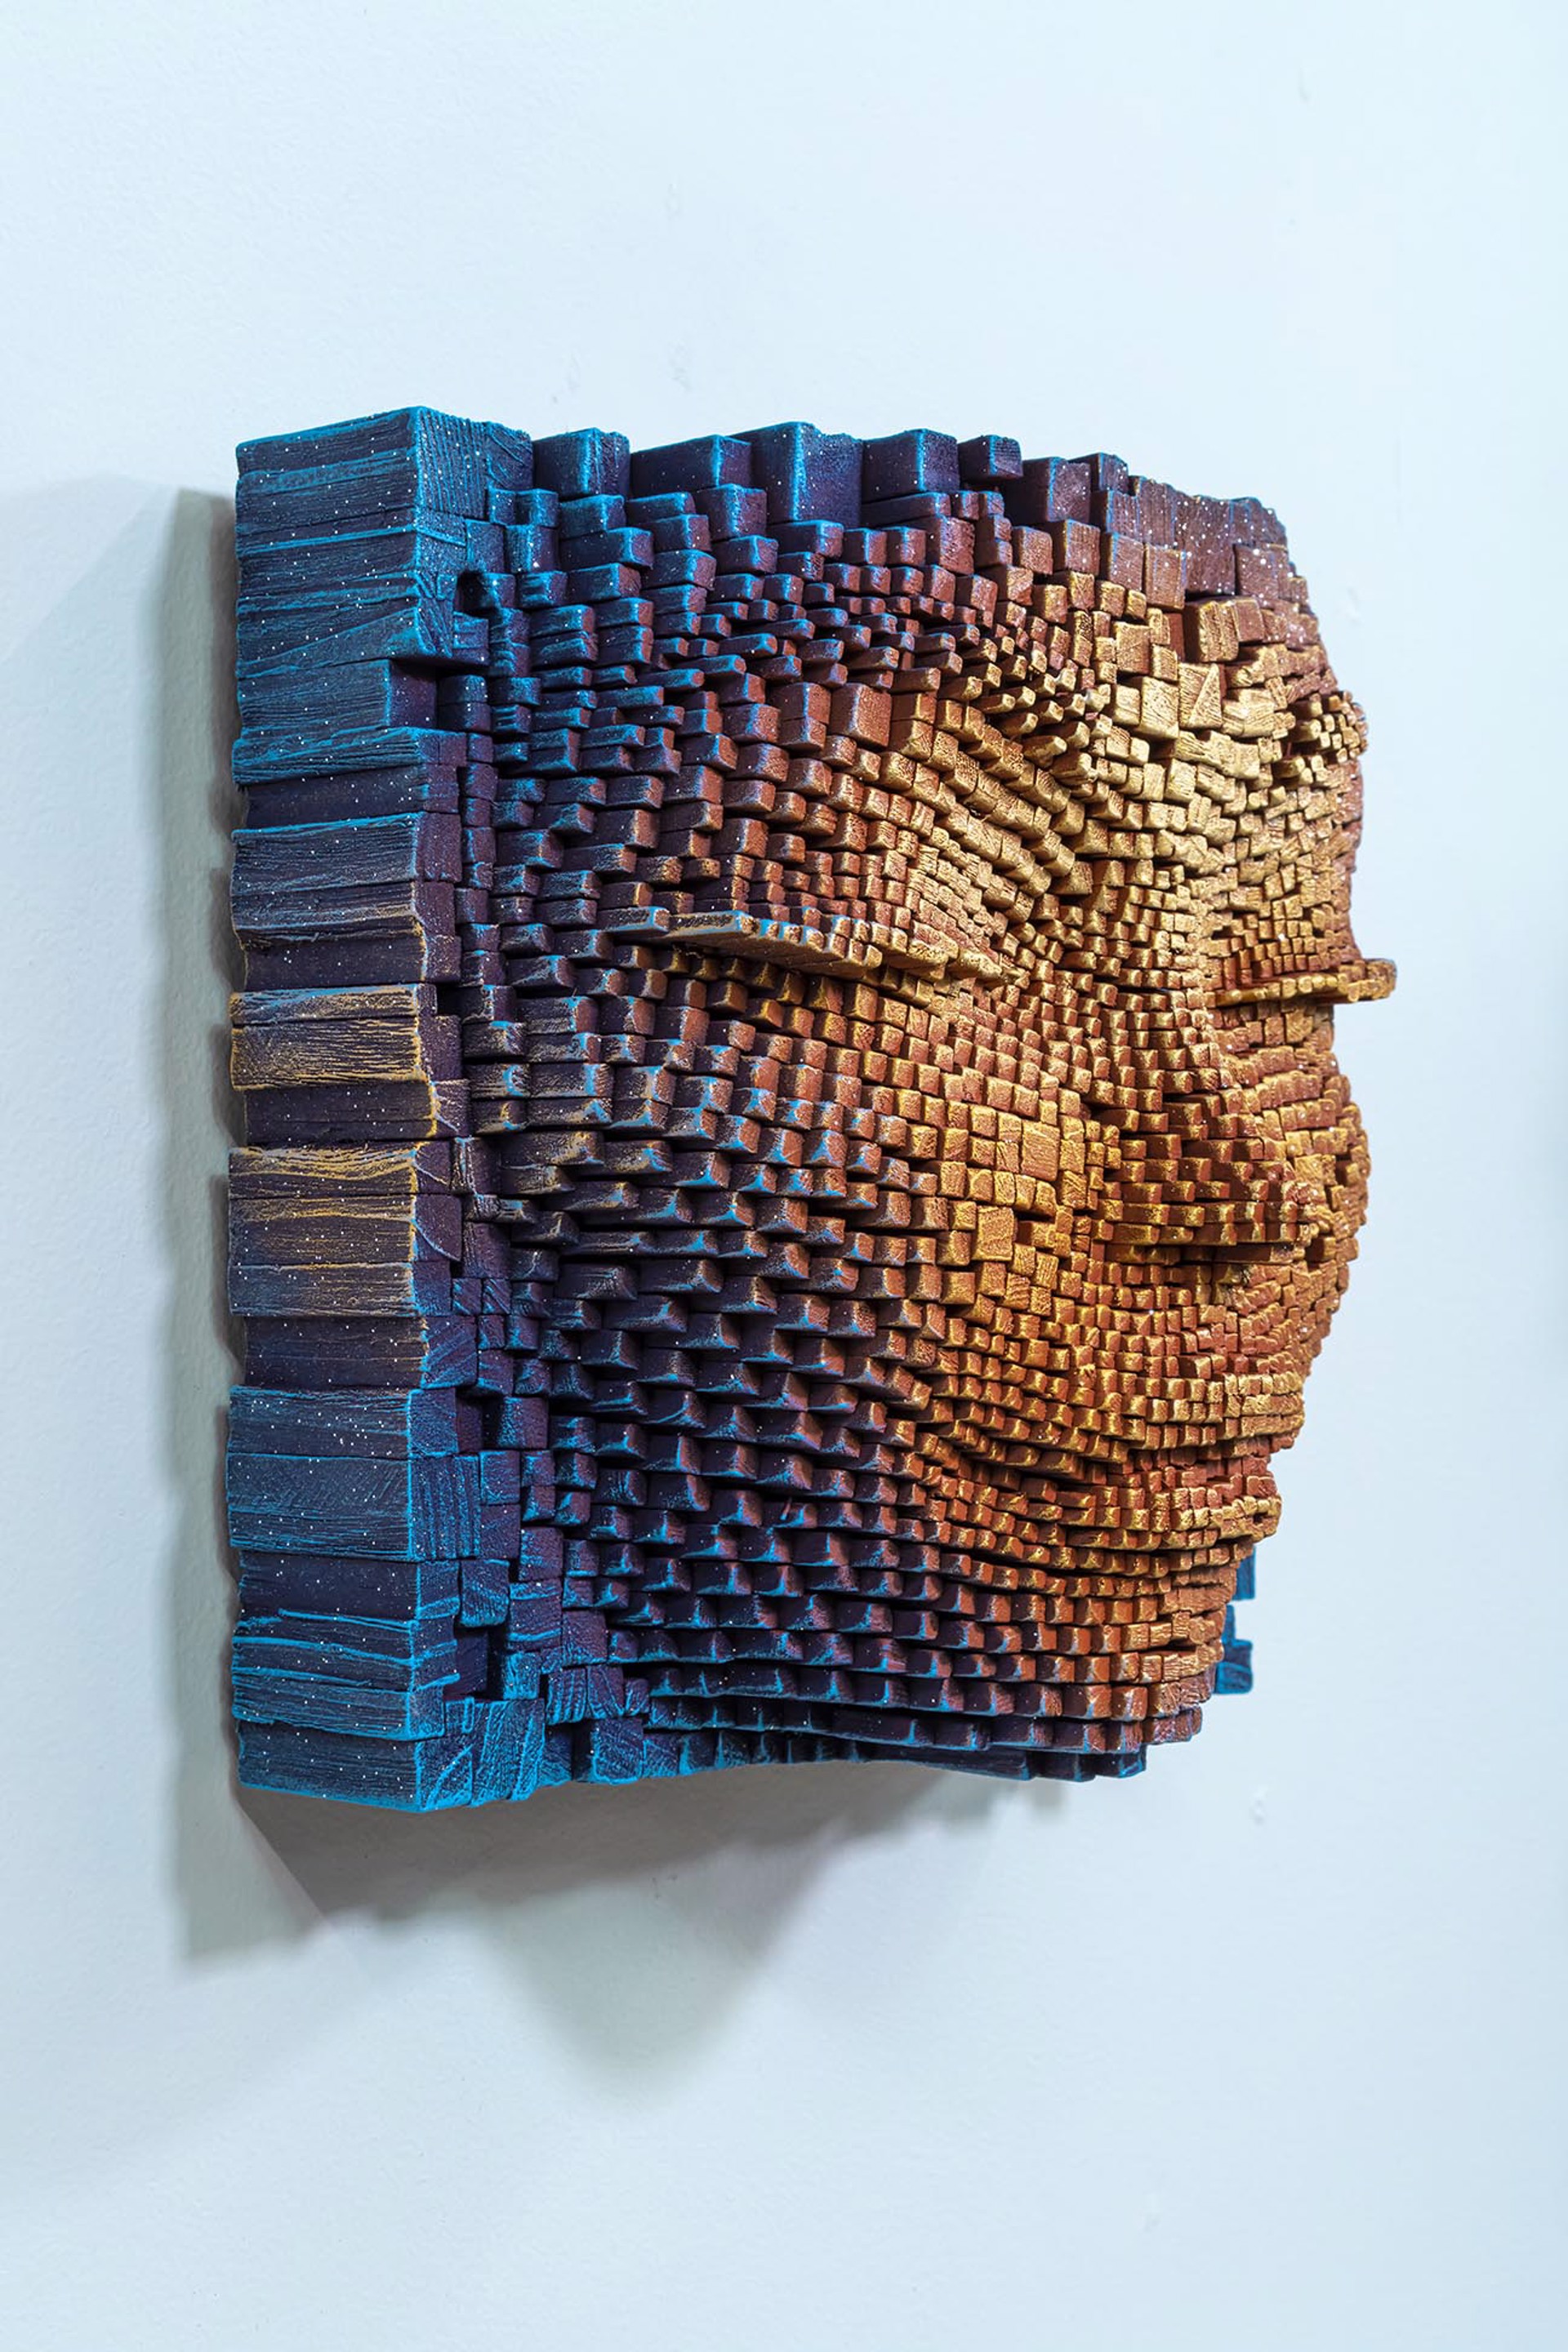 Mask #245 by Gil Bruvel